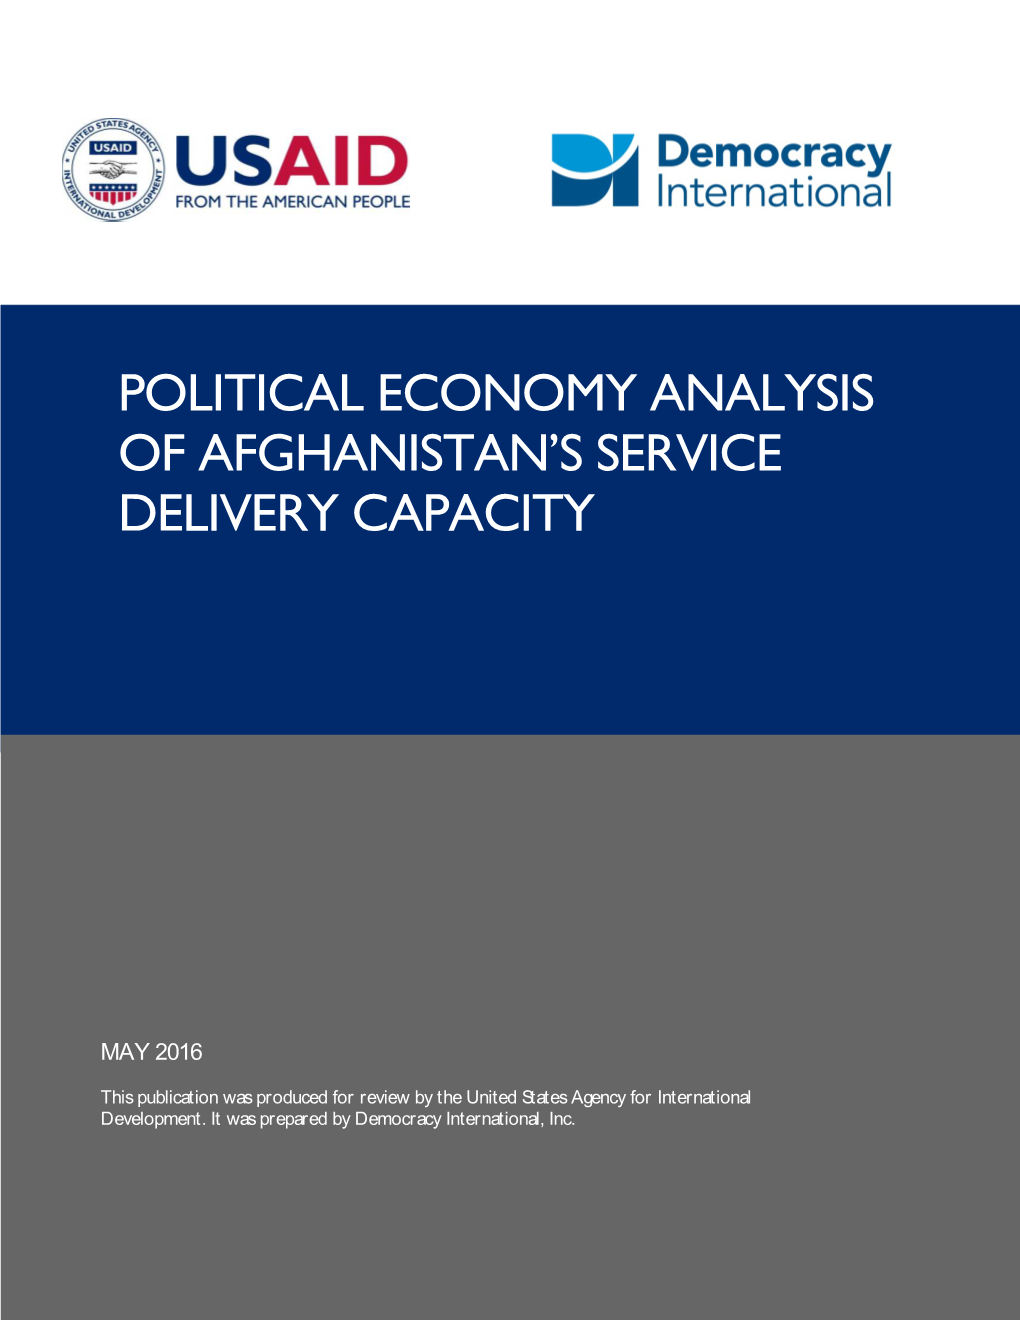 Political Economy Analysis of Afghanistan's Service